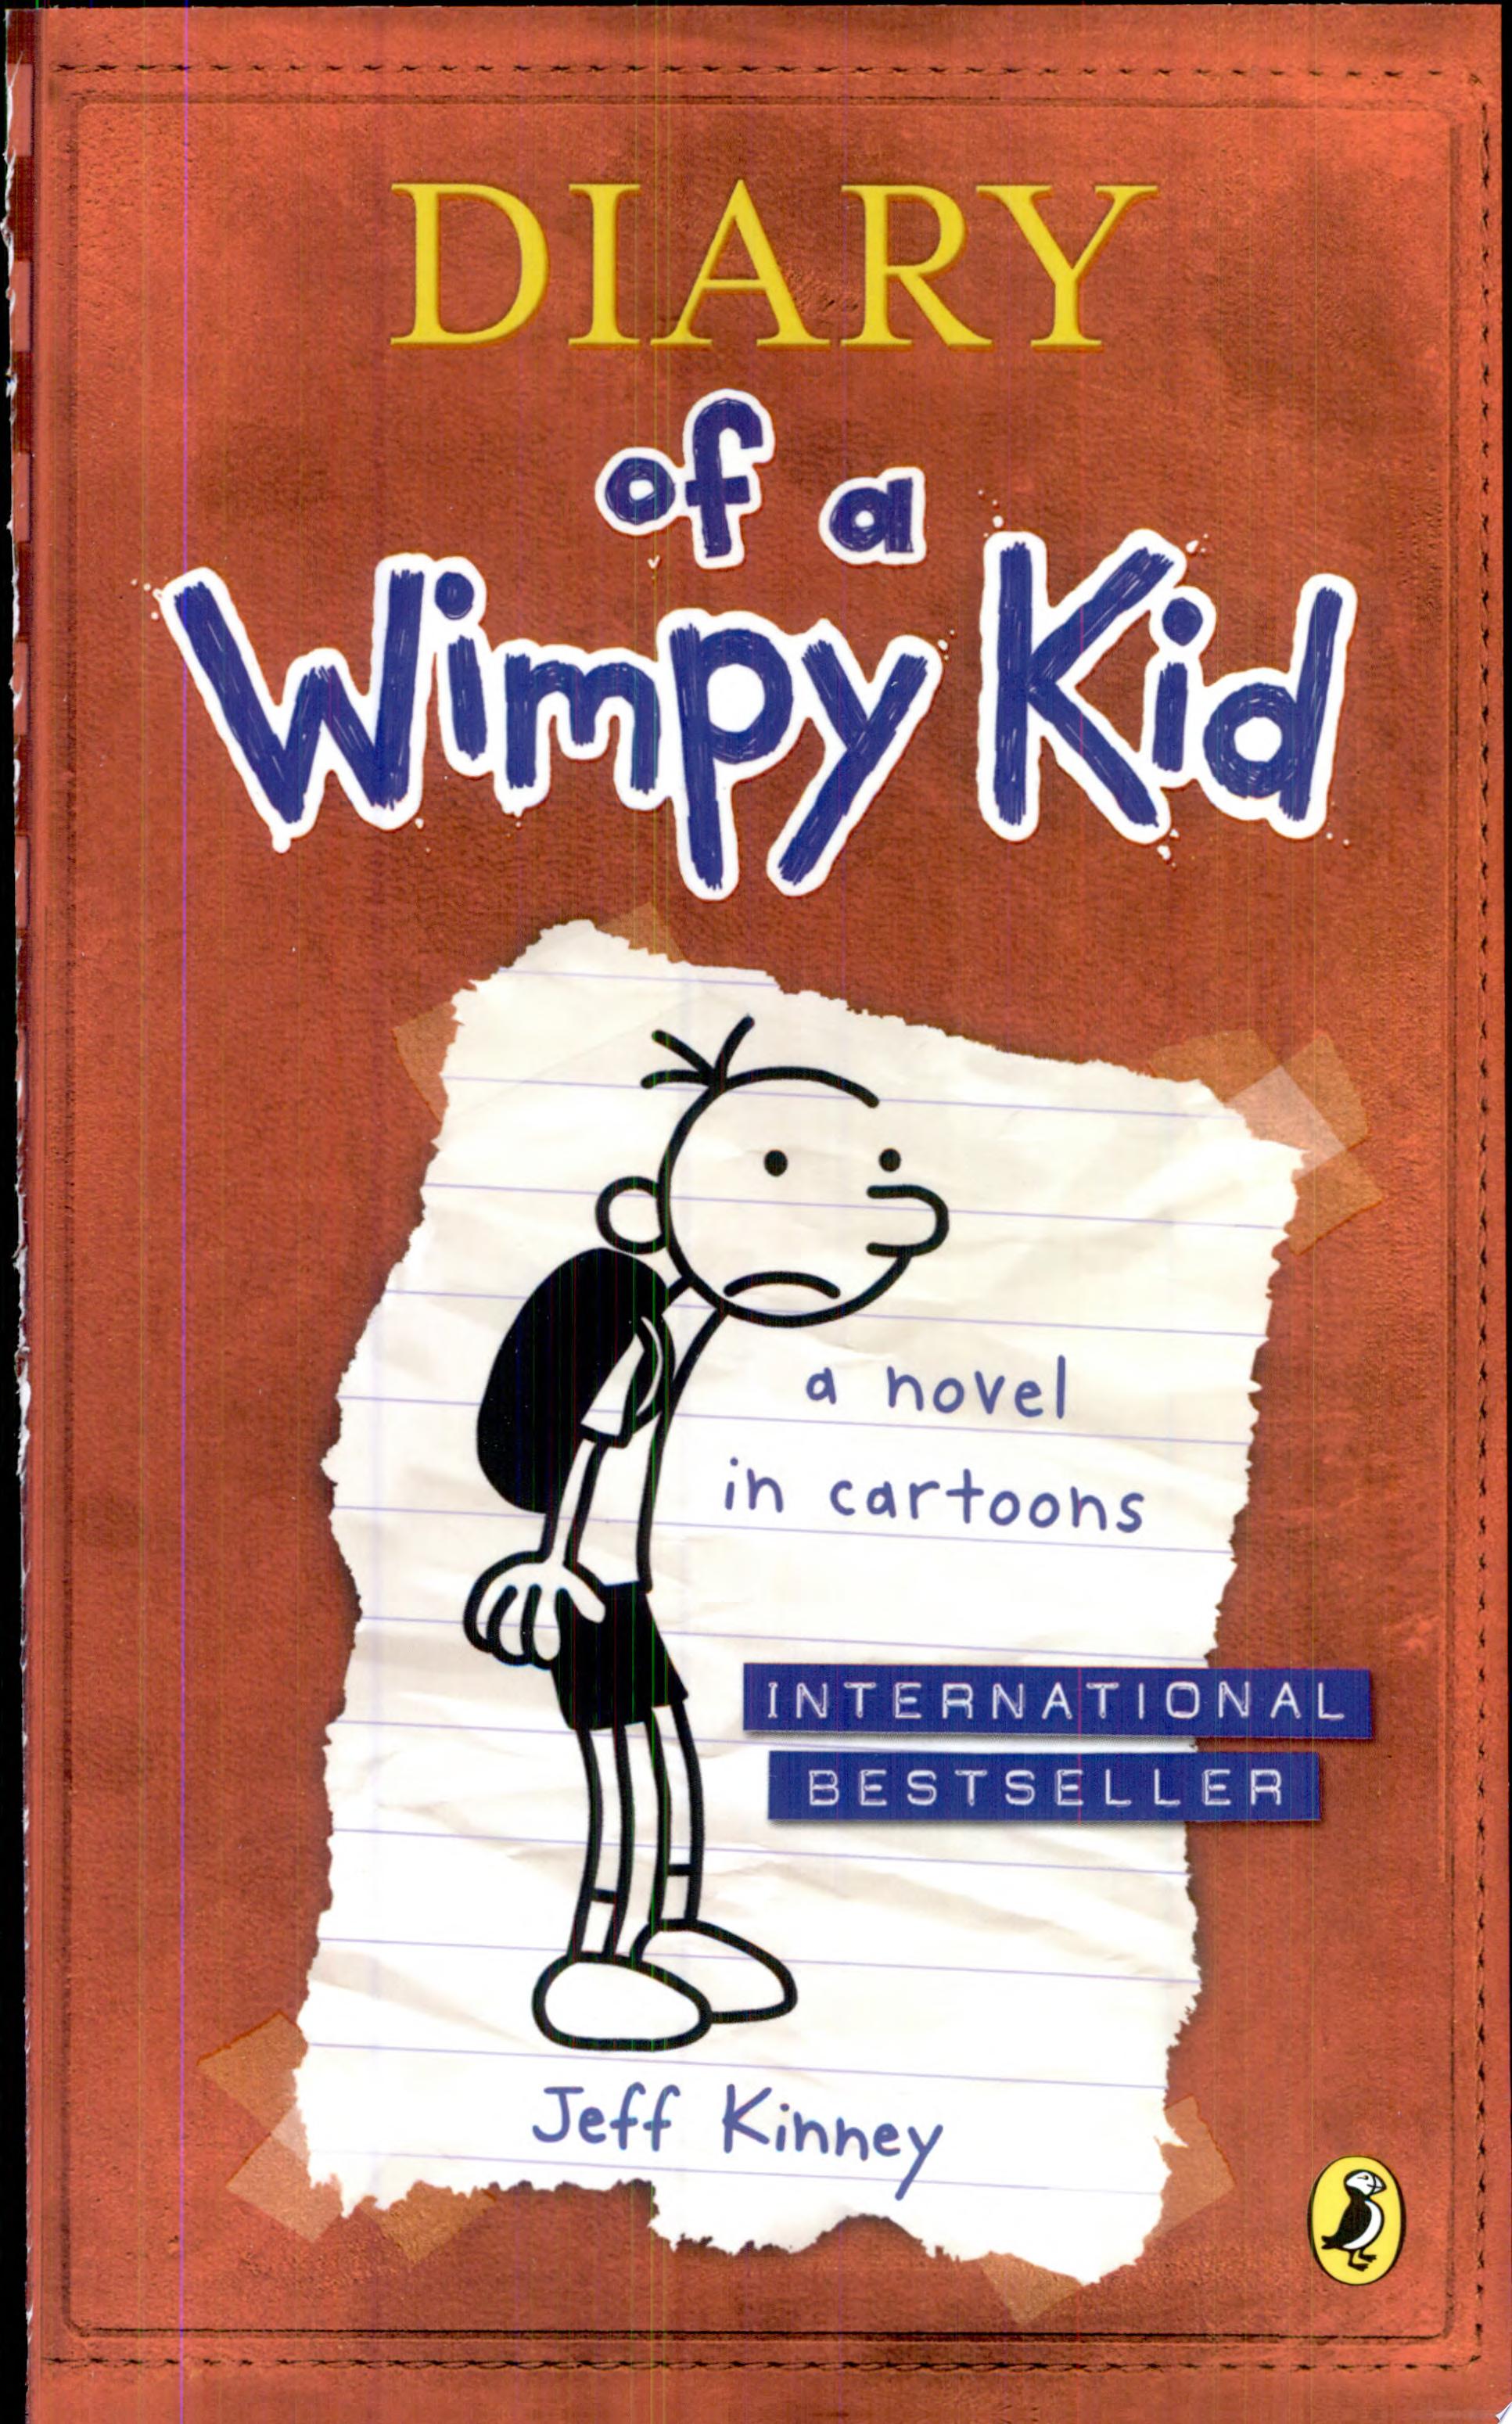 Image for "Diary of a Wimpy Kid"